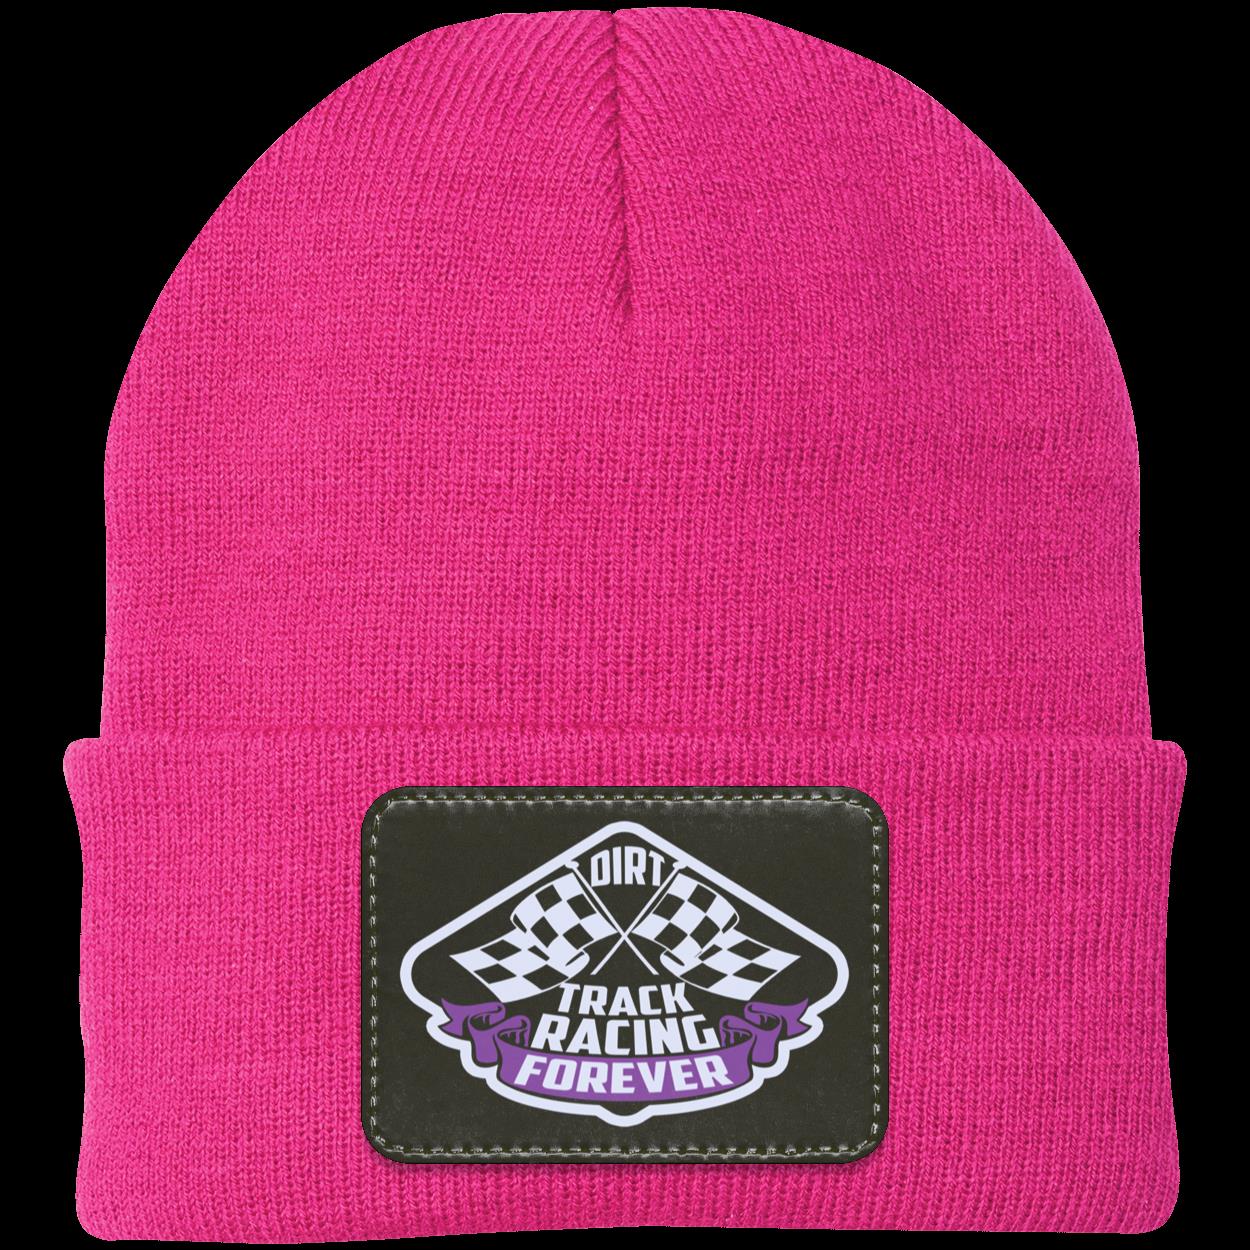 Racing Forever Patched Knit Cap V2